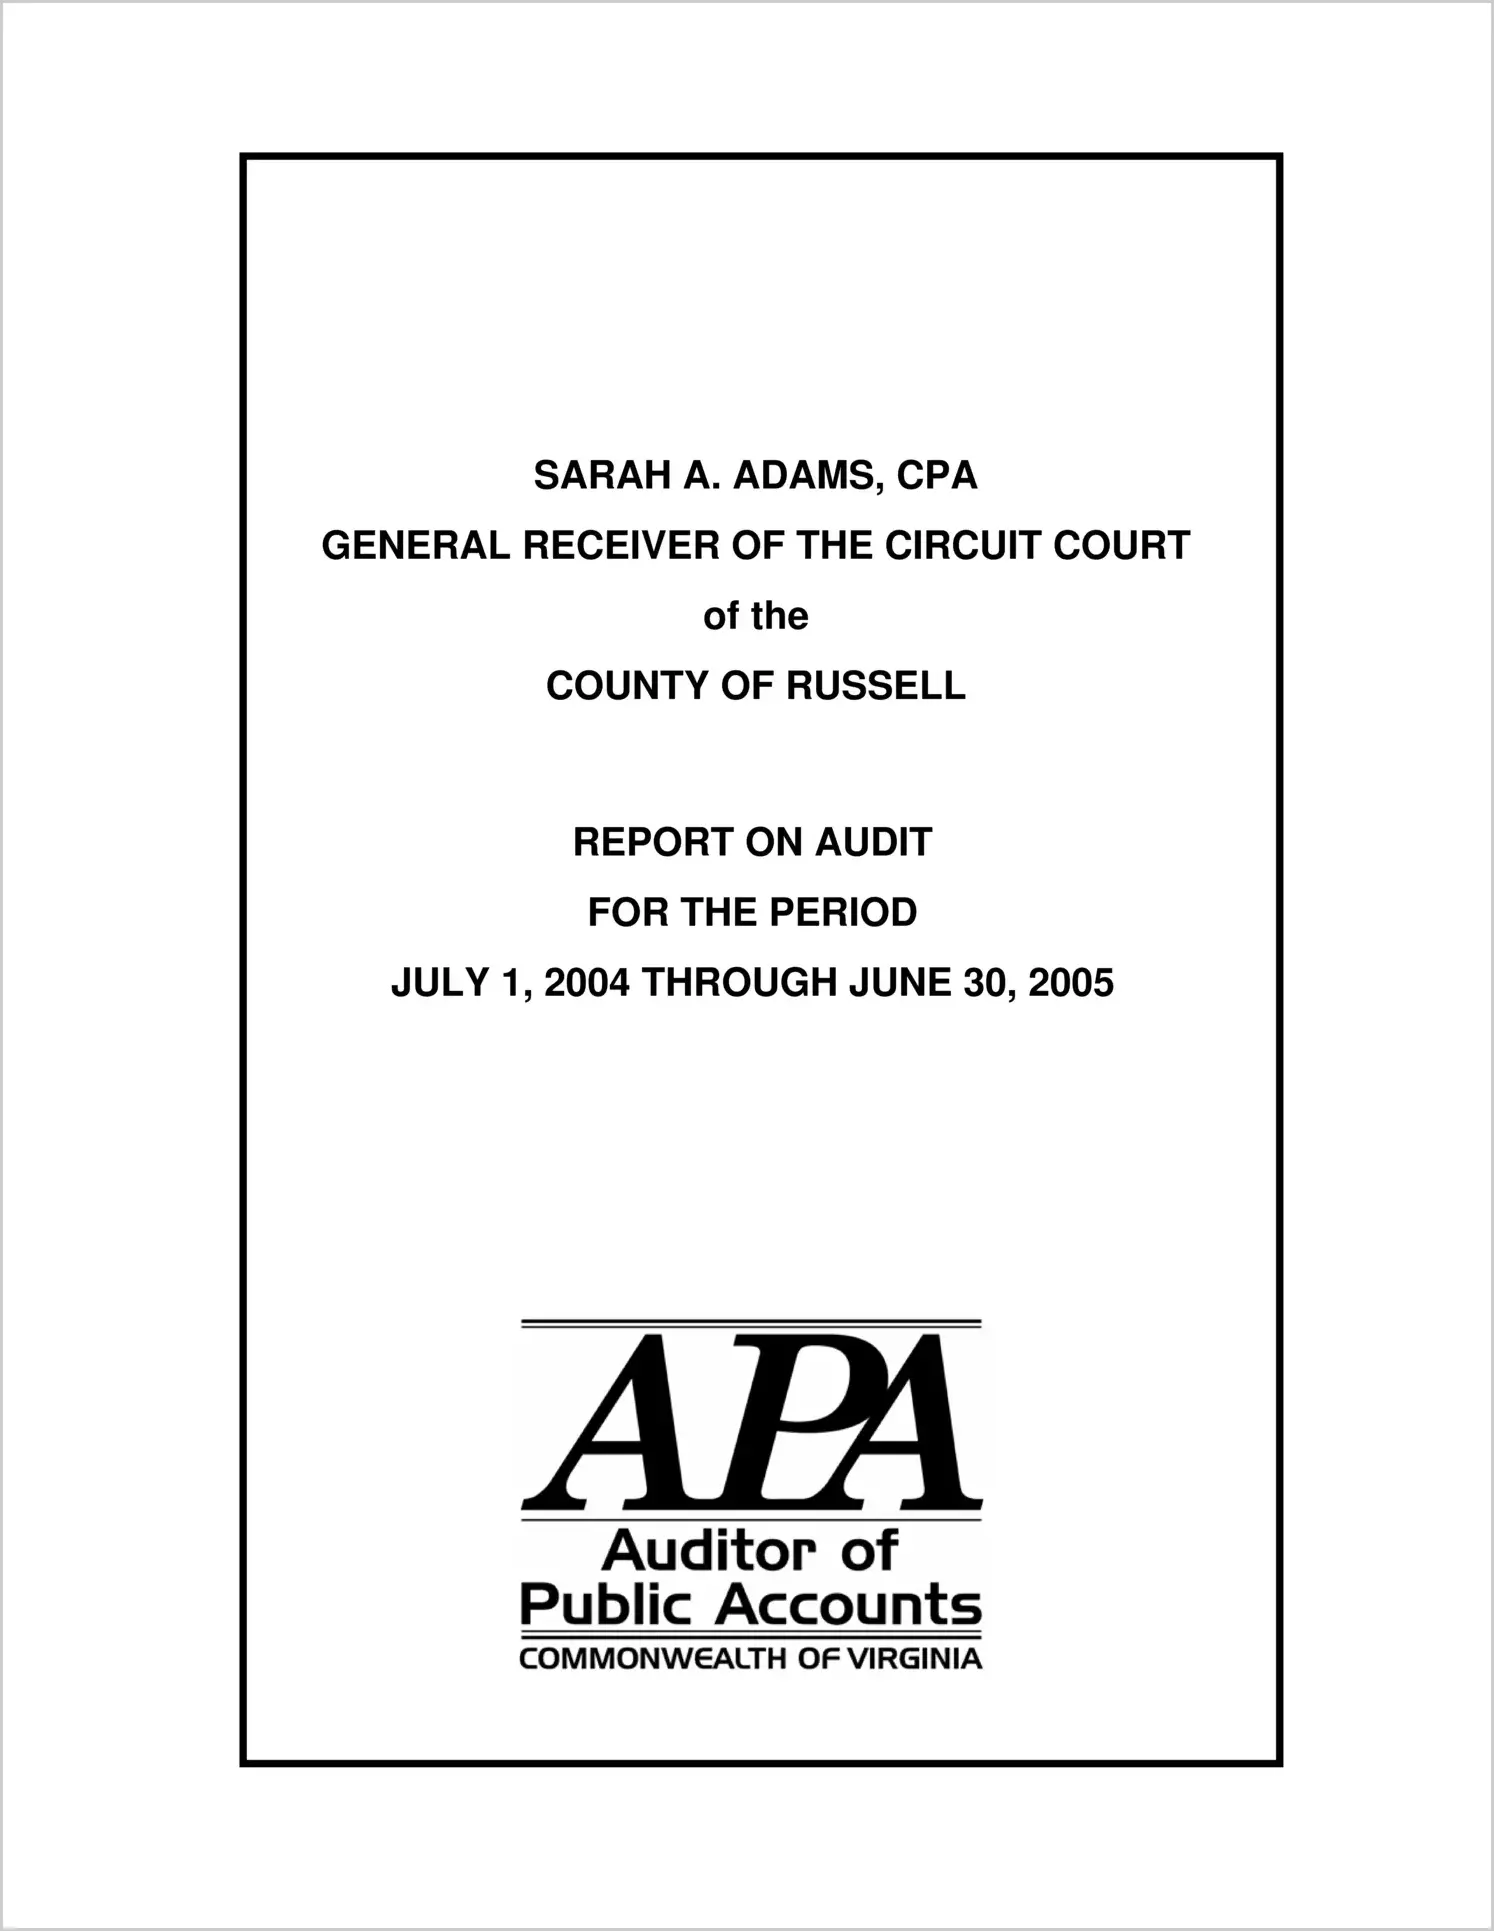 General Receiver of the Circuit Court of the County of Russell for the period July 1, 2004 through June 30, 2005